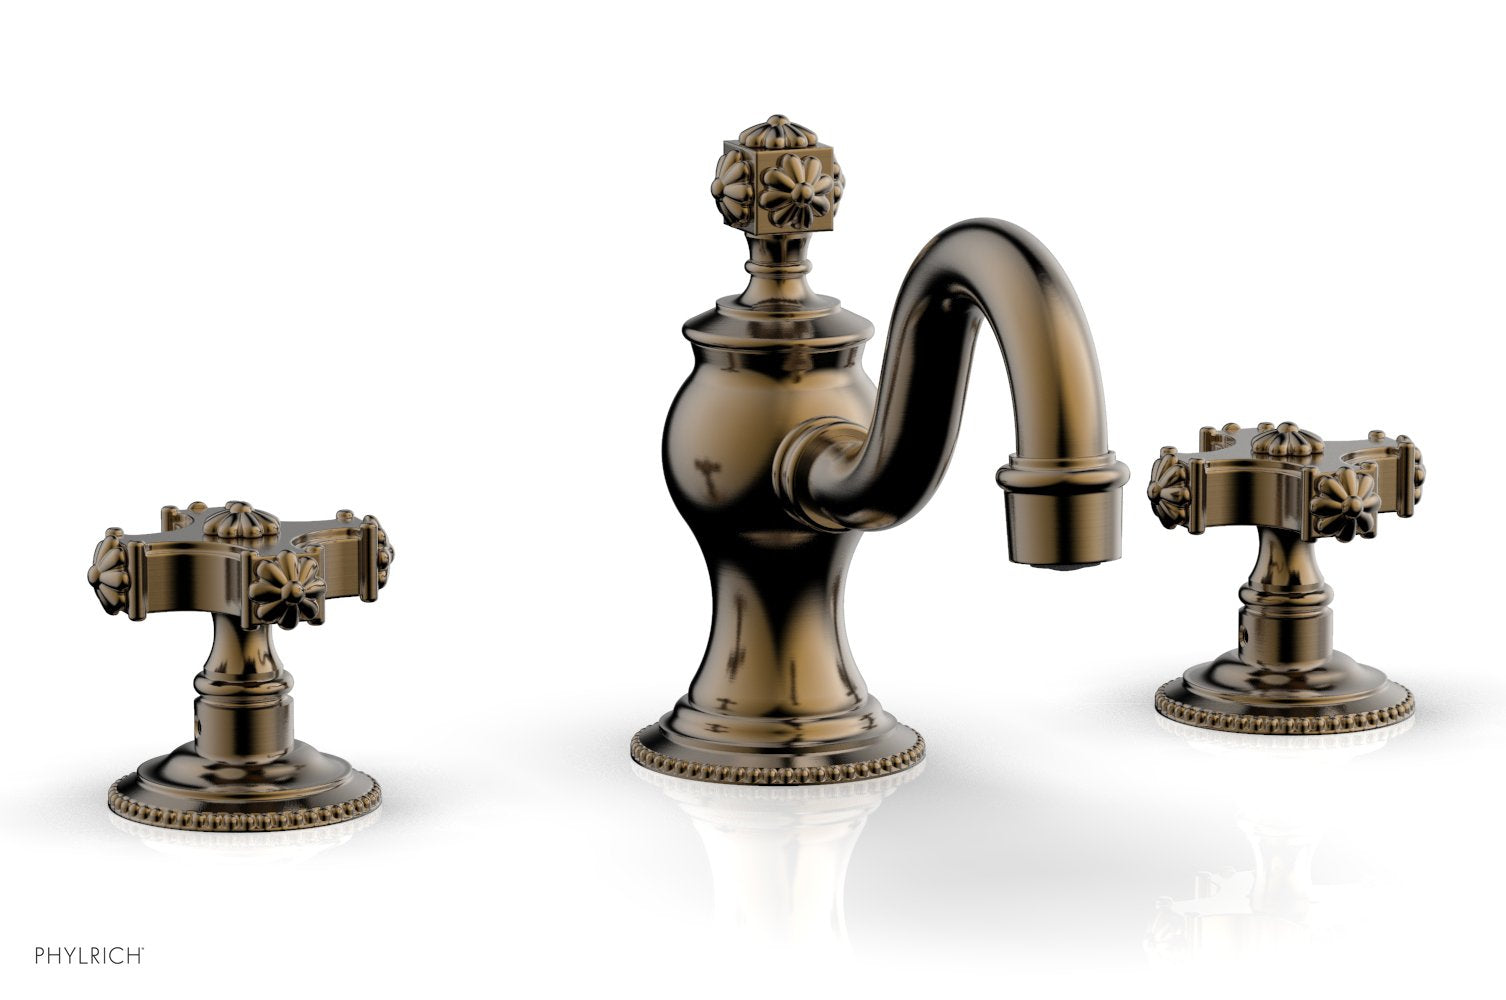 Phylrich MARVELLE Widespread Faucet